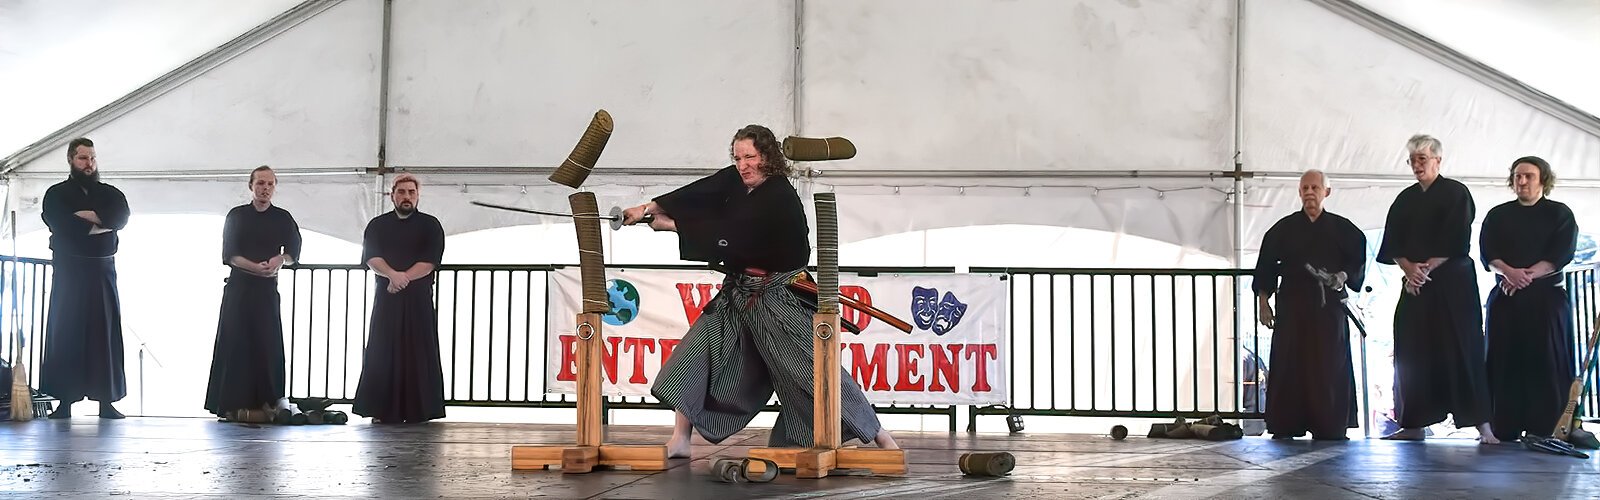 A member of Nihonzashi gives a demonstration of Japanese swordsmanship on stage at the 47th annual International Folk Fair in St Petersburg.